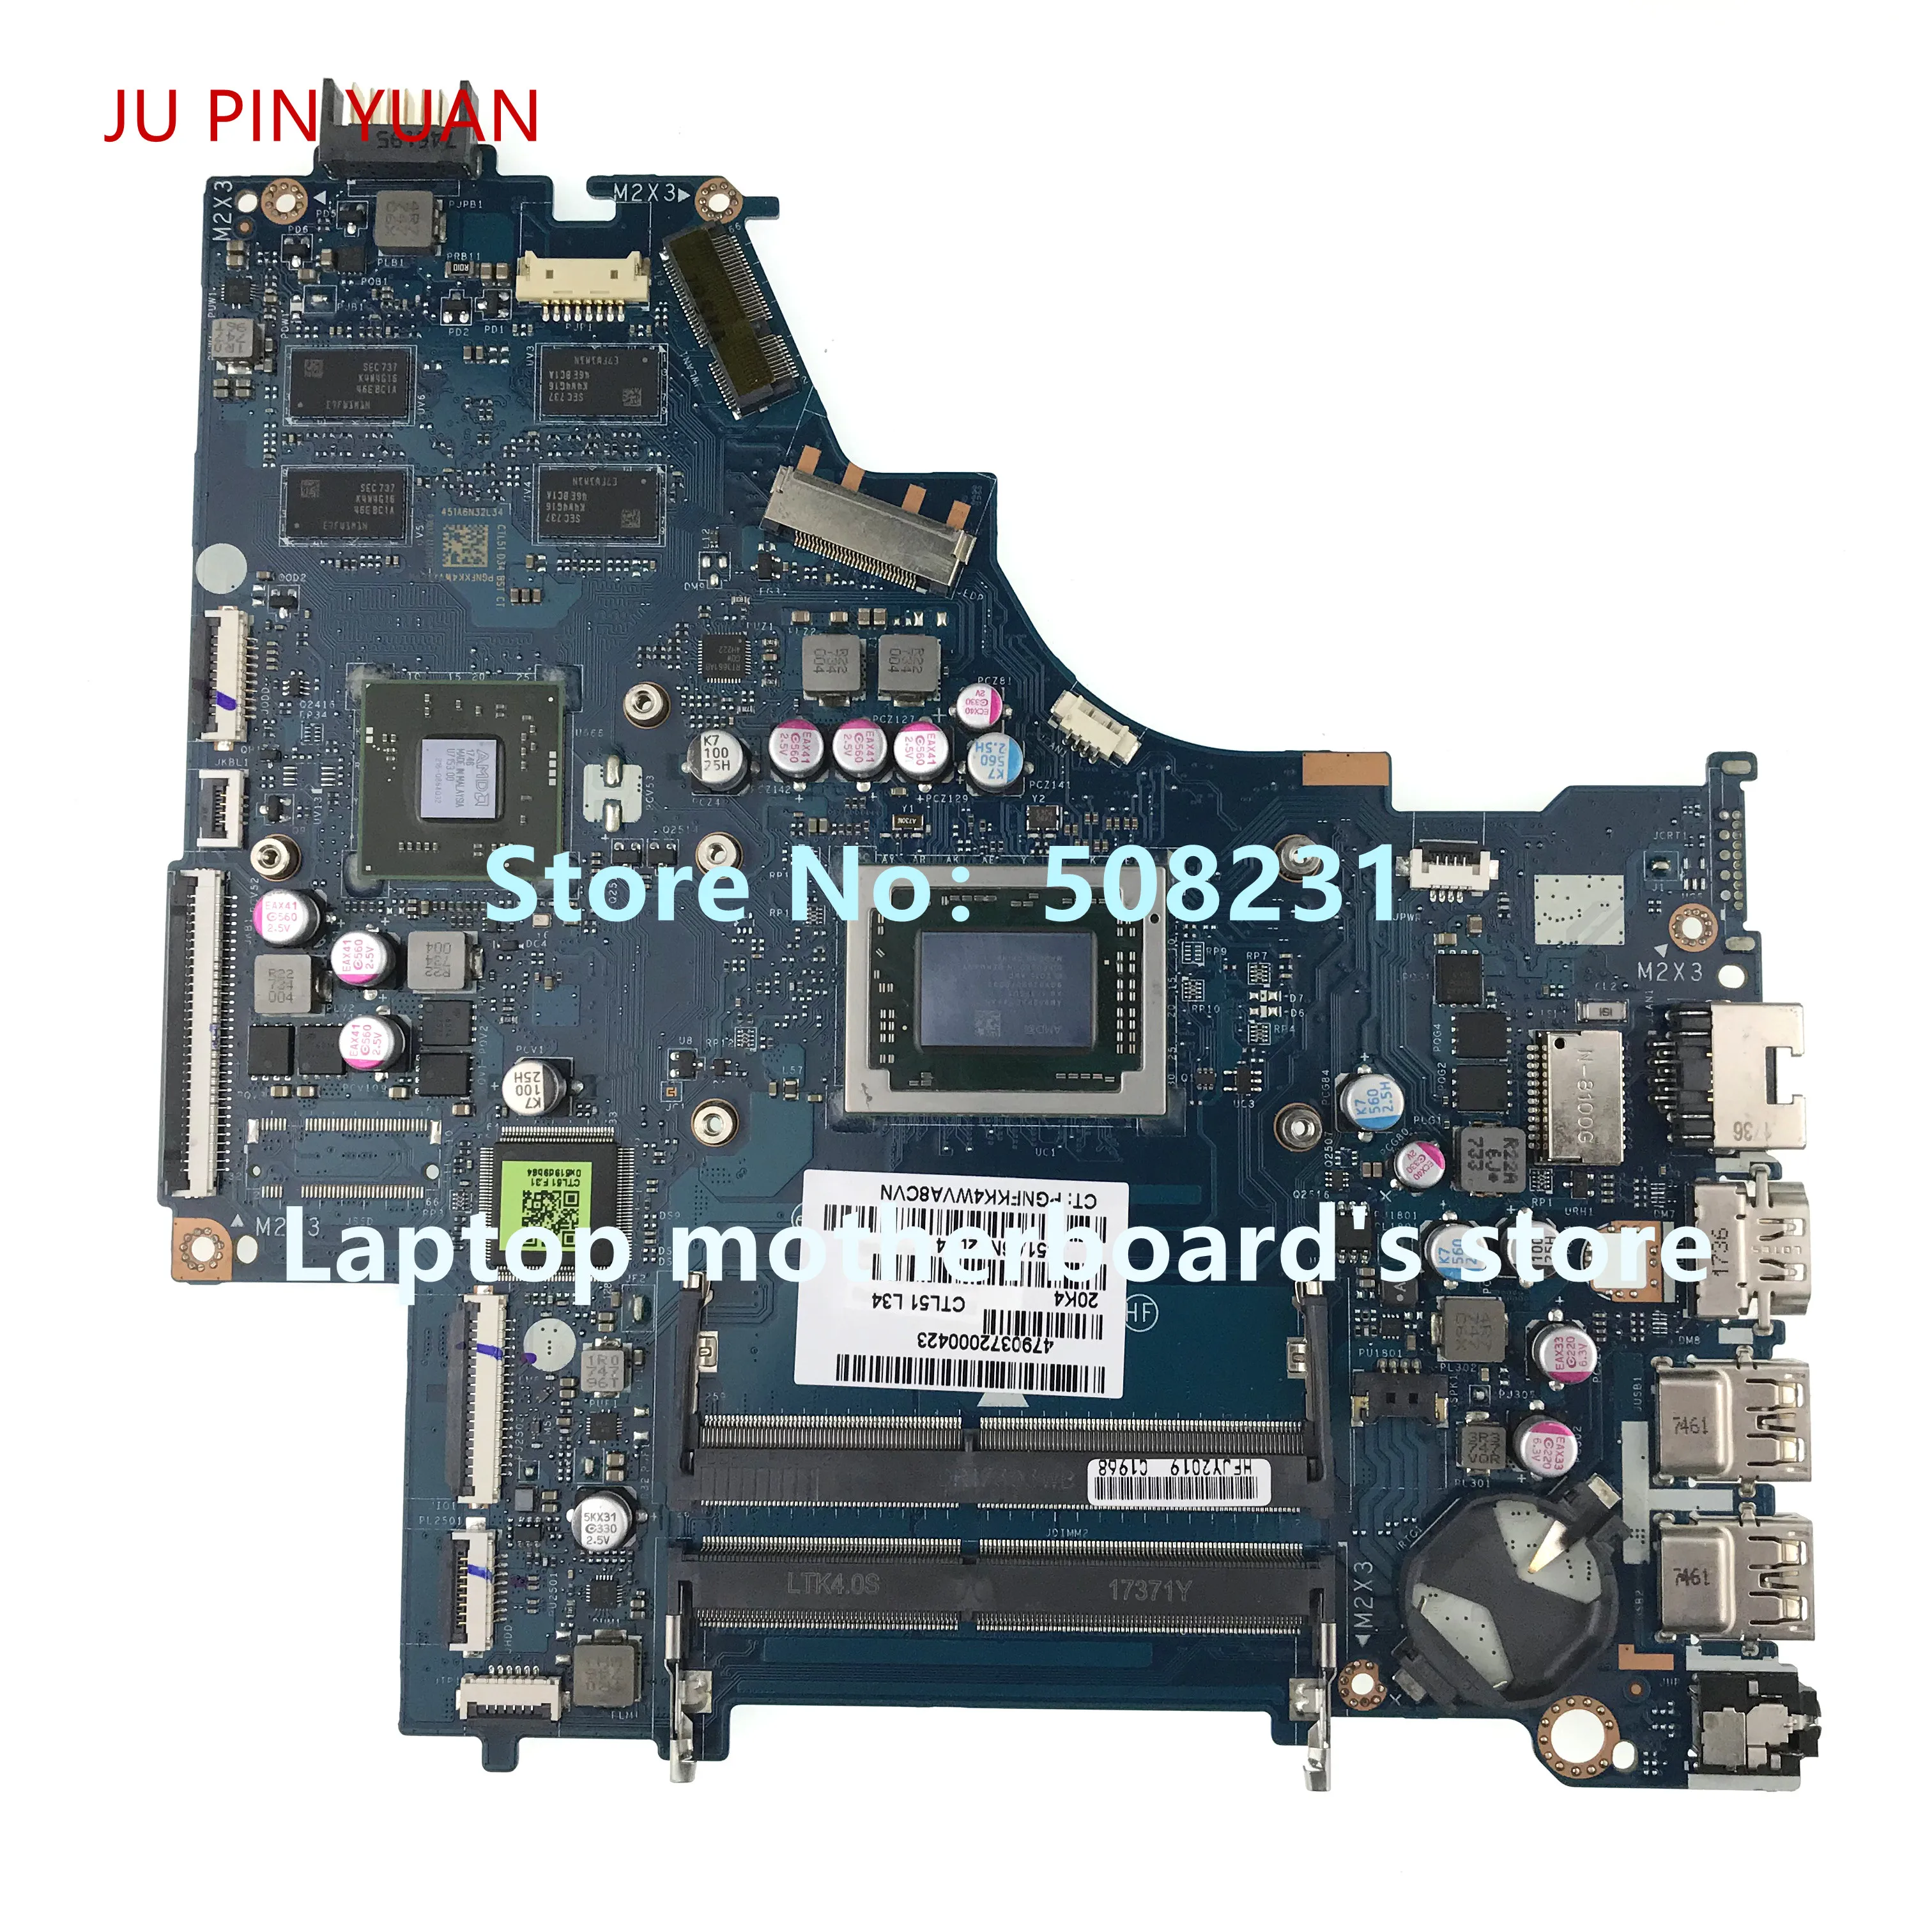 JU PIN YUAN 924723-001 924723-601 LA-E831P For HP 15-BW 15G-BX Laptop Motherboard with 530 2GB A10-9620P 100% fully tested | Компьютеры и